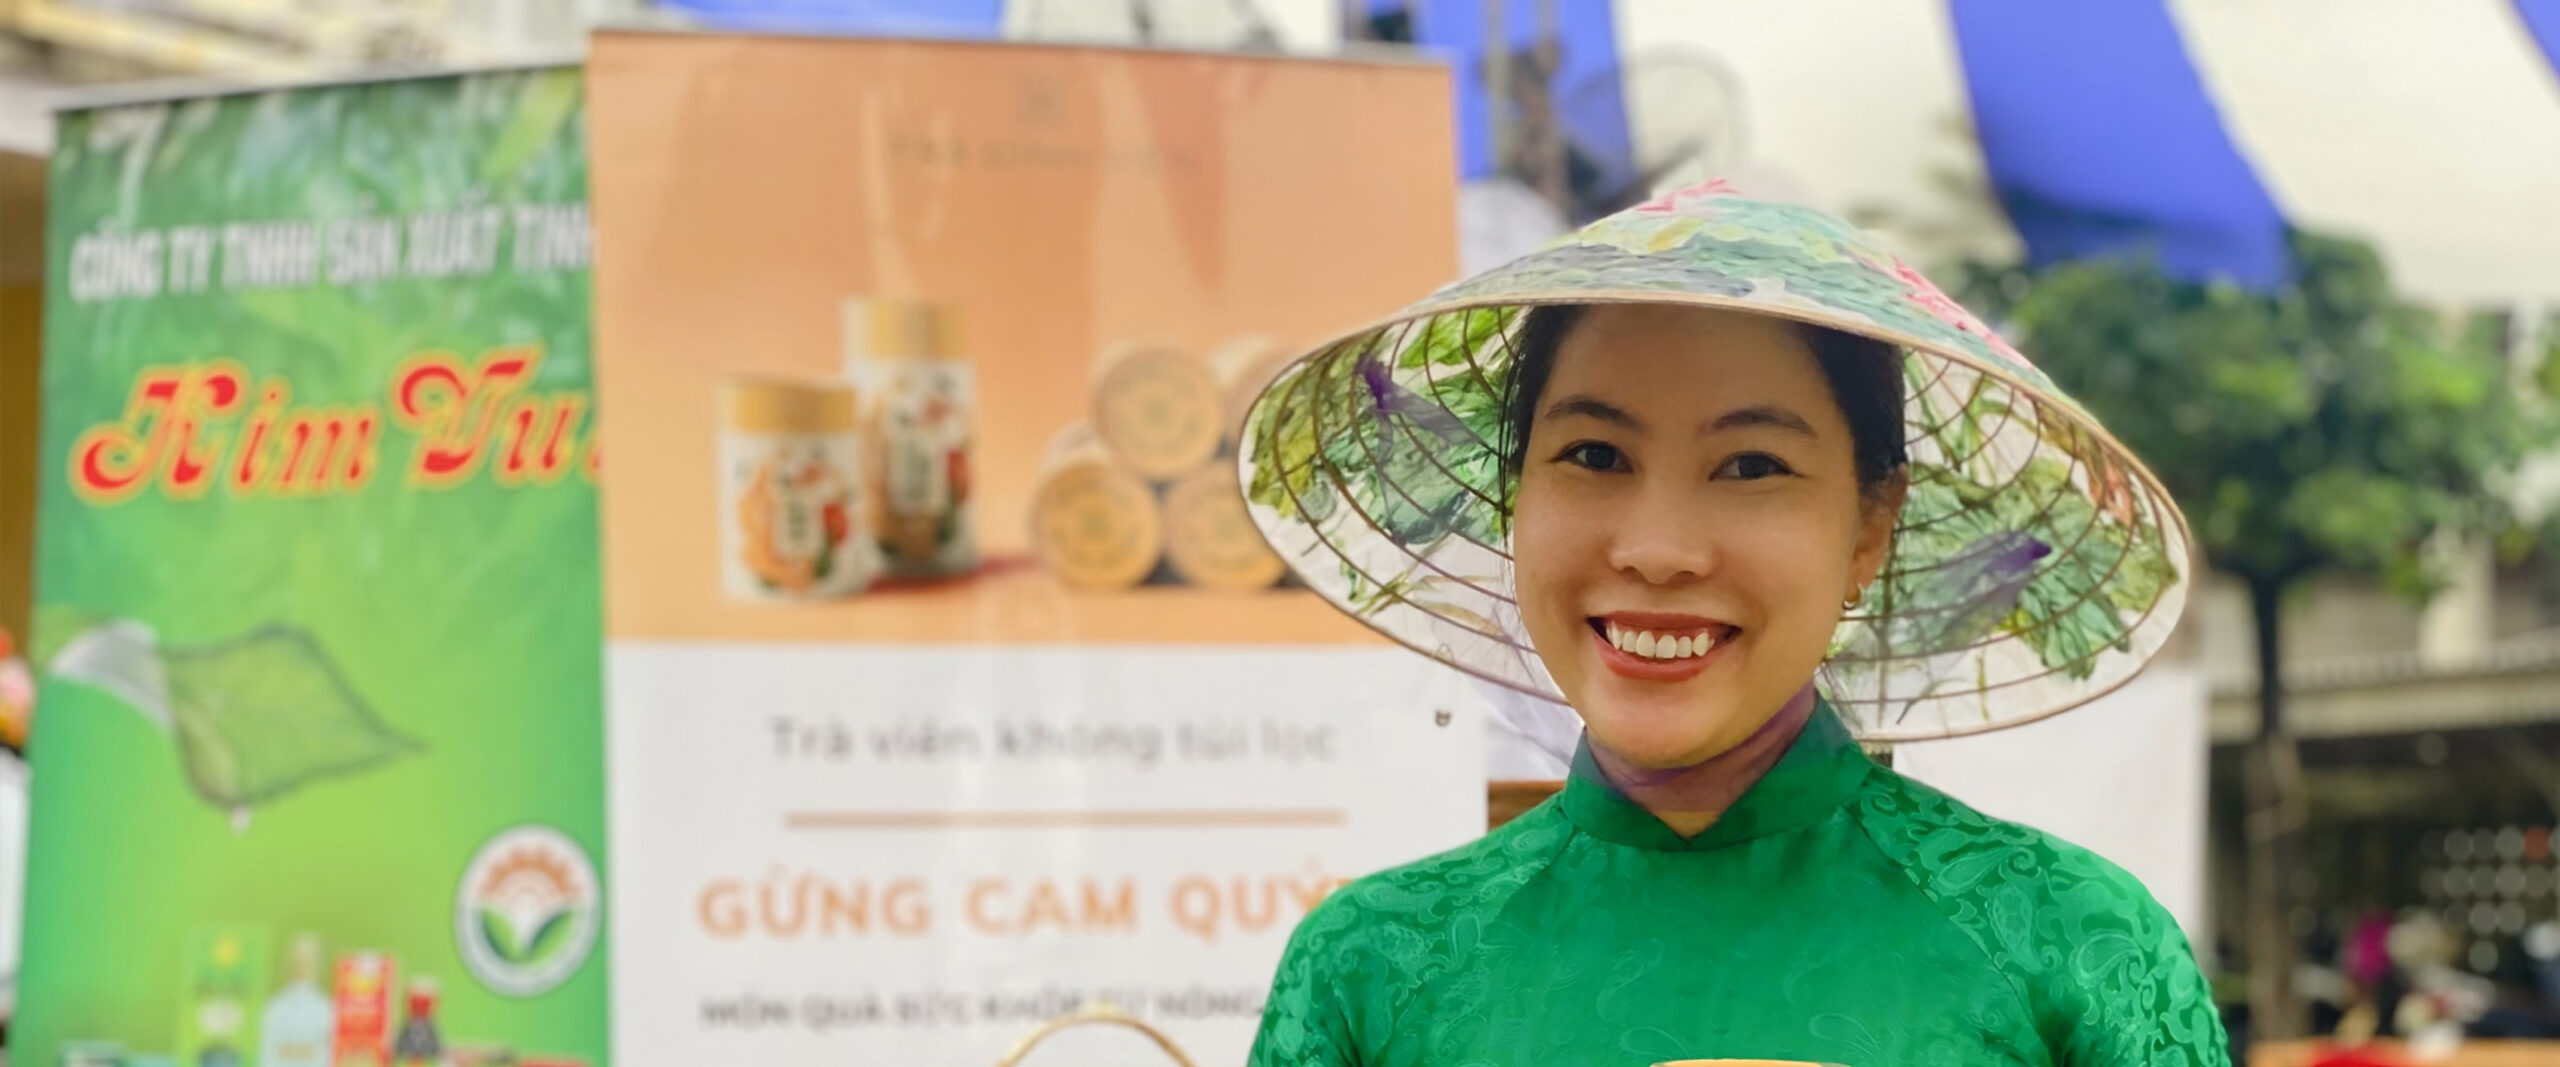 A business woman and Futuremakers participant poses with a product in traditional Vietnamese dress